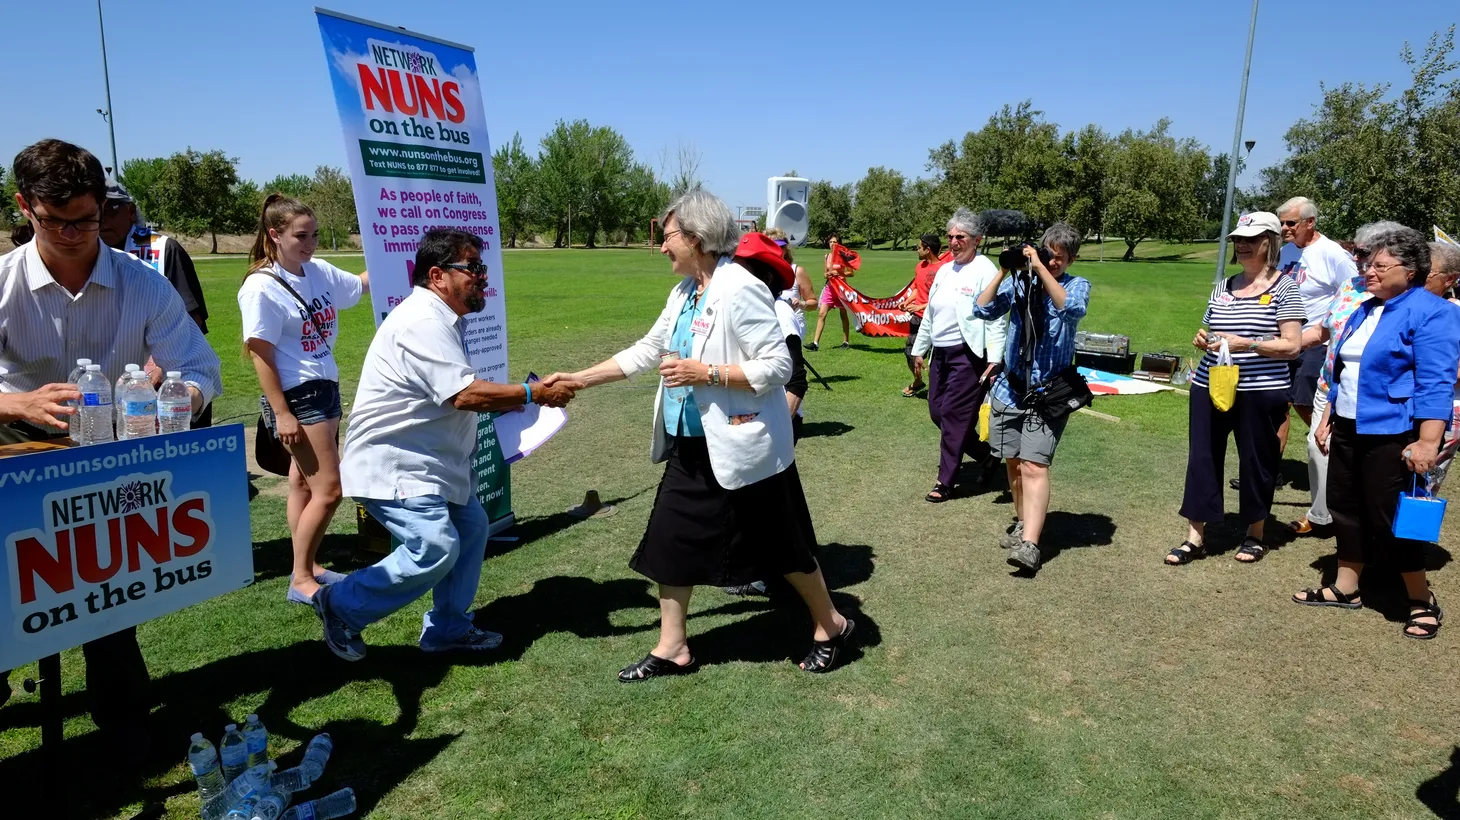 Sister Simone Campbell prepares for a march in support of a new immigration law in Bakersfield, CA. June 15, 2013.